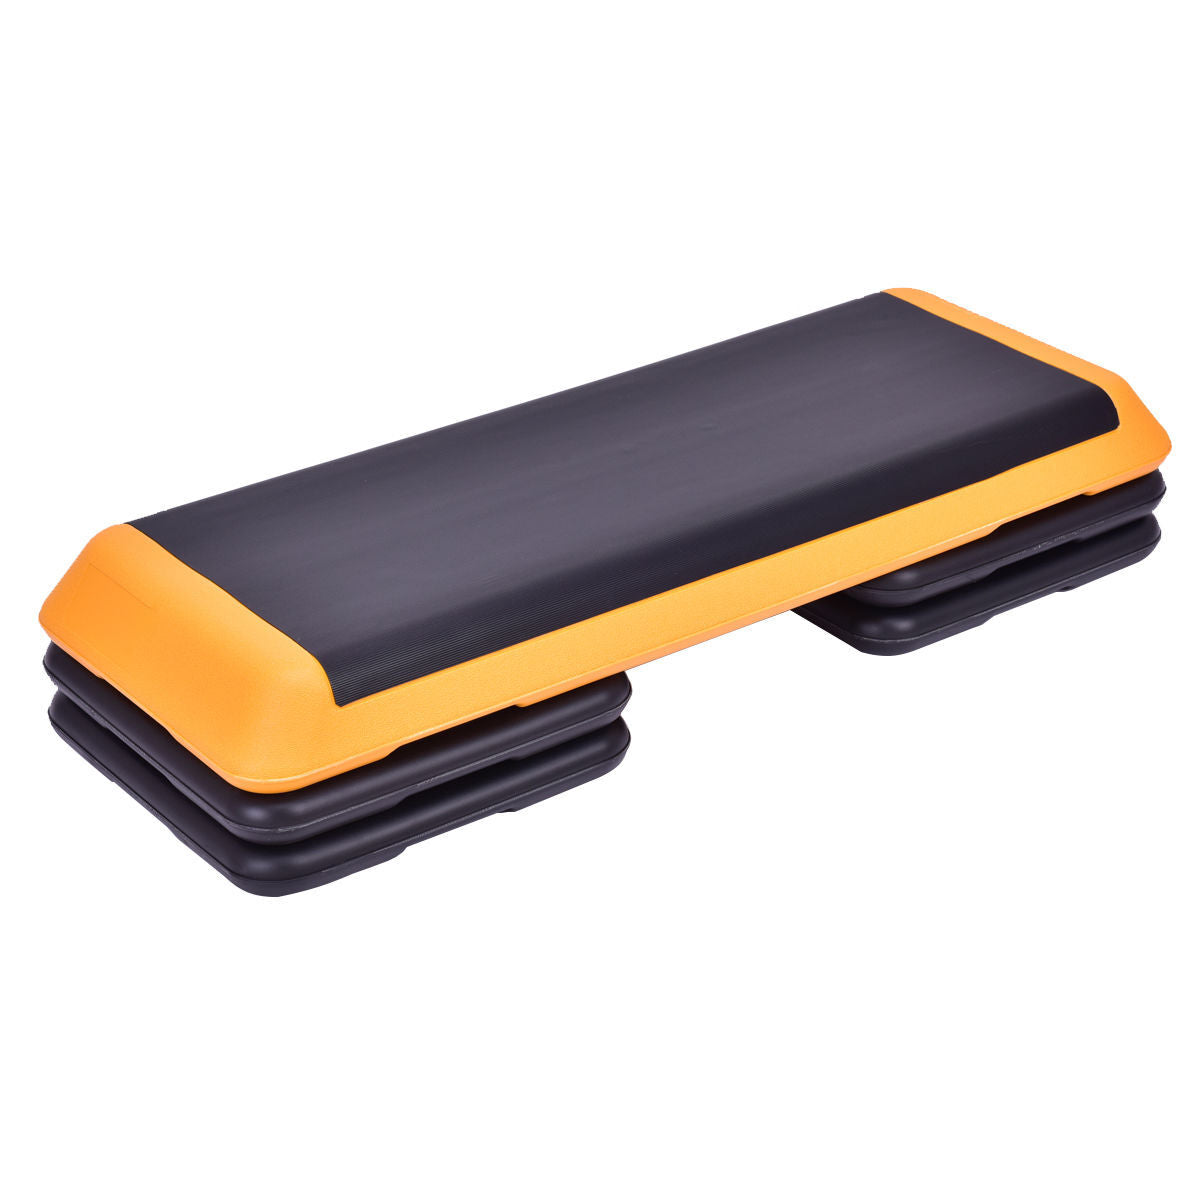 43 Inches Height Adjustable Fitness Aerobic Step with Risers-Orange - Color: Orange